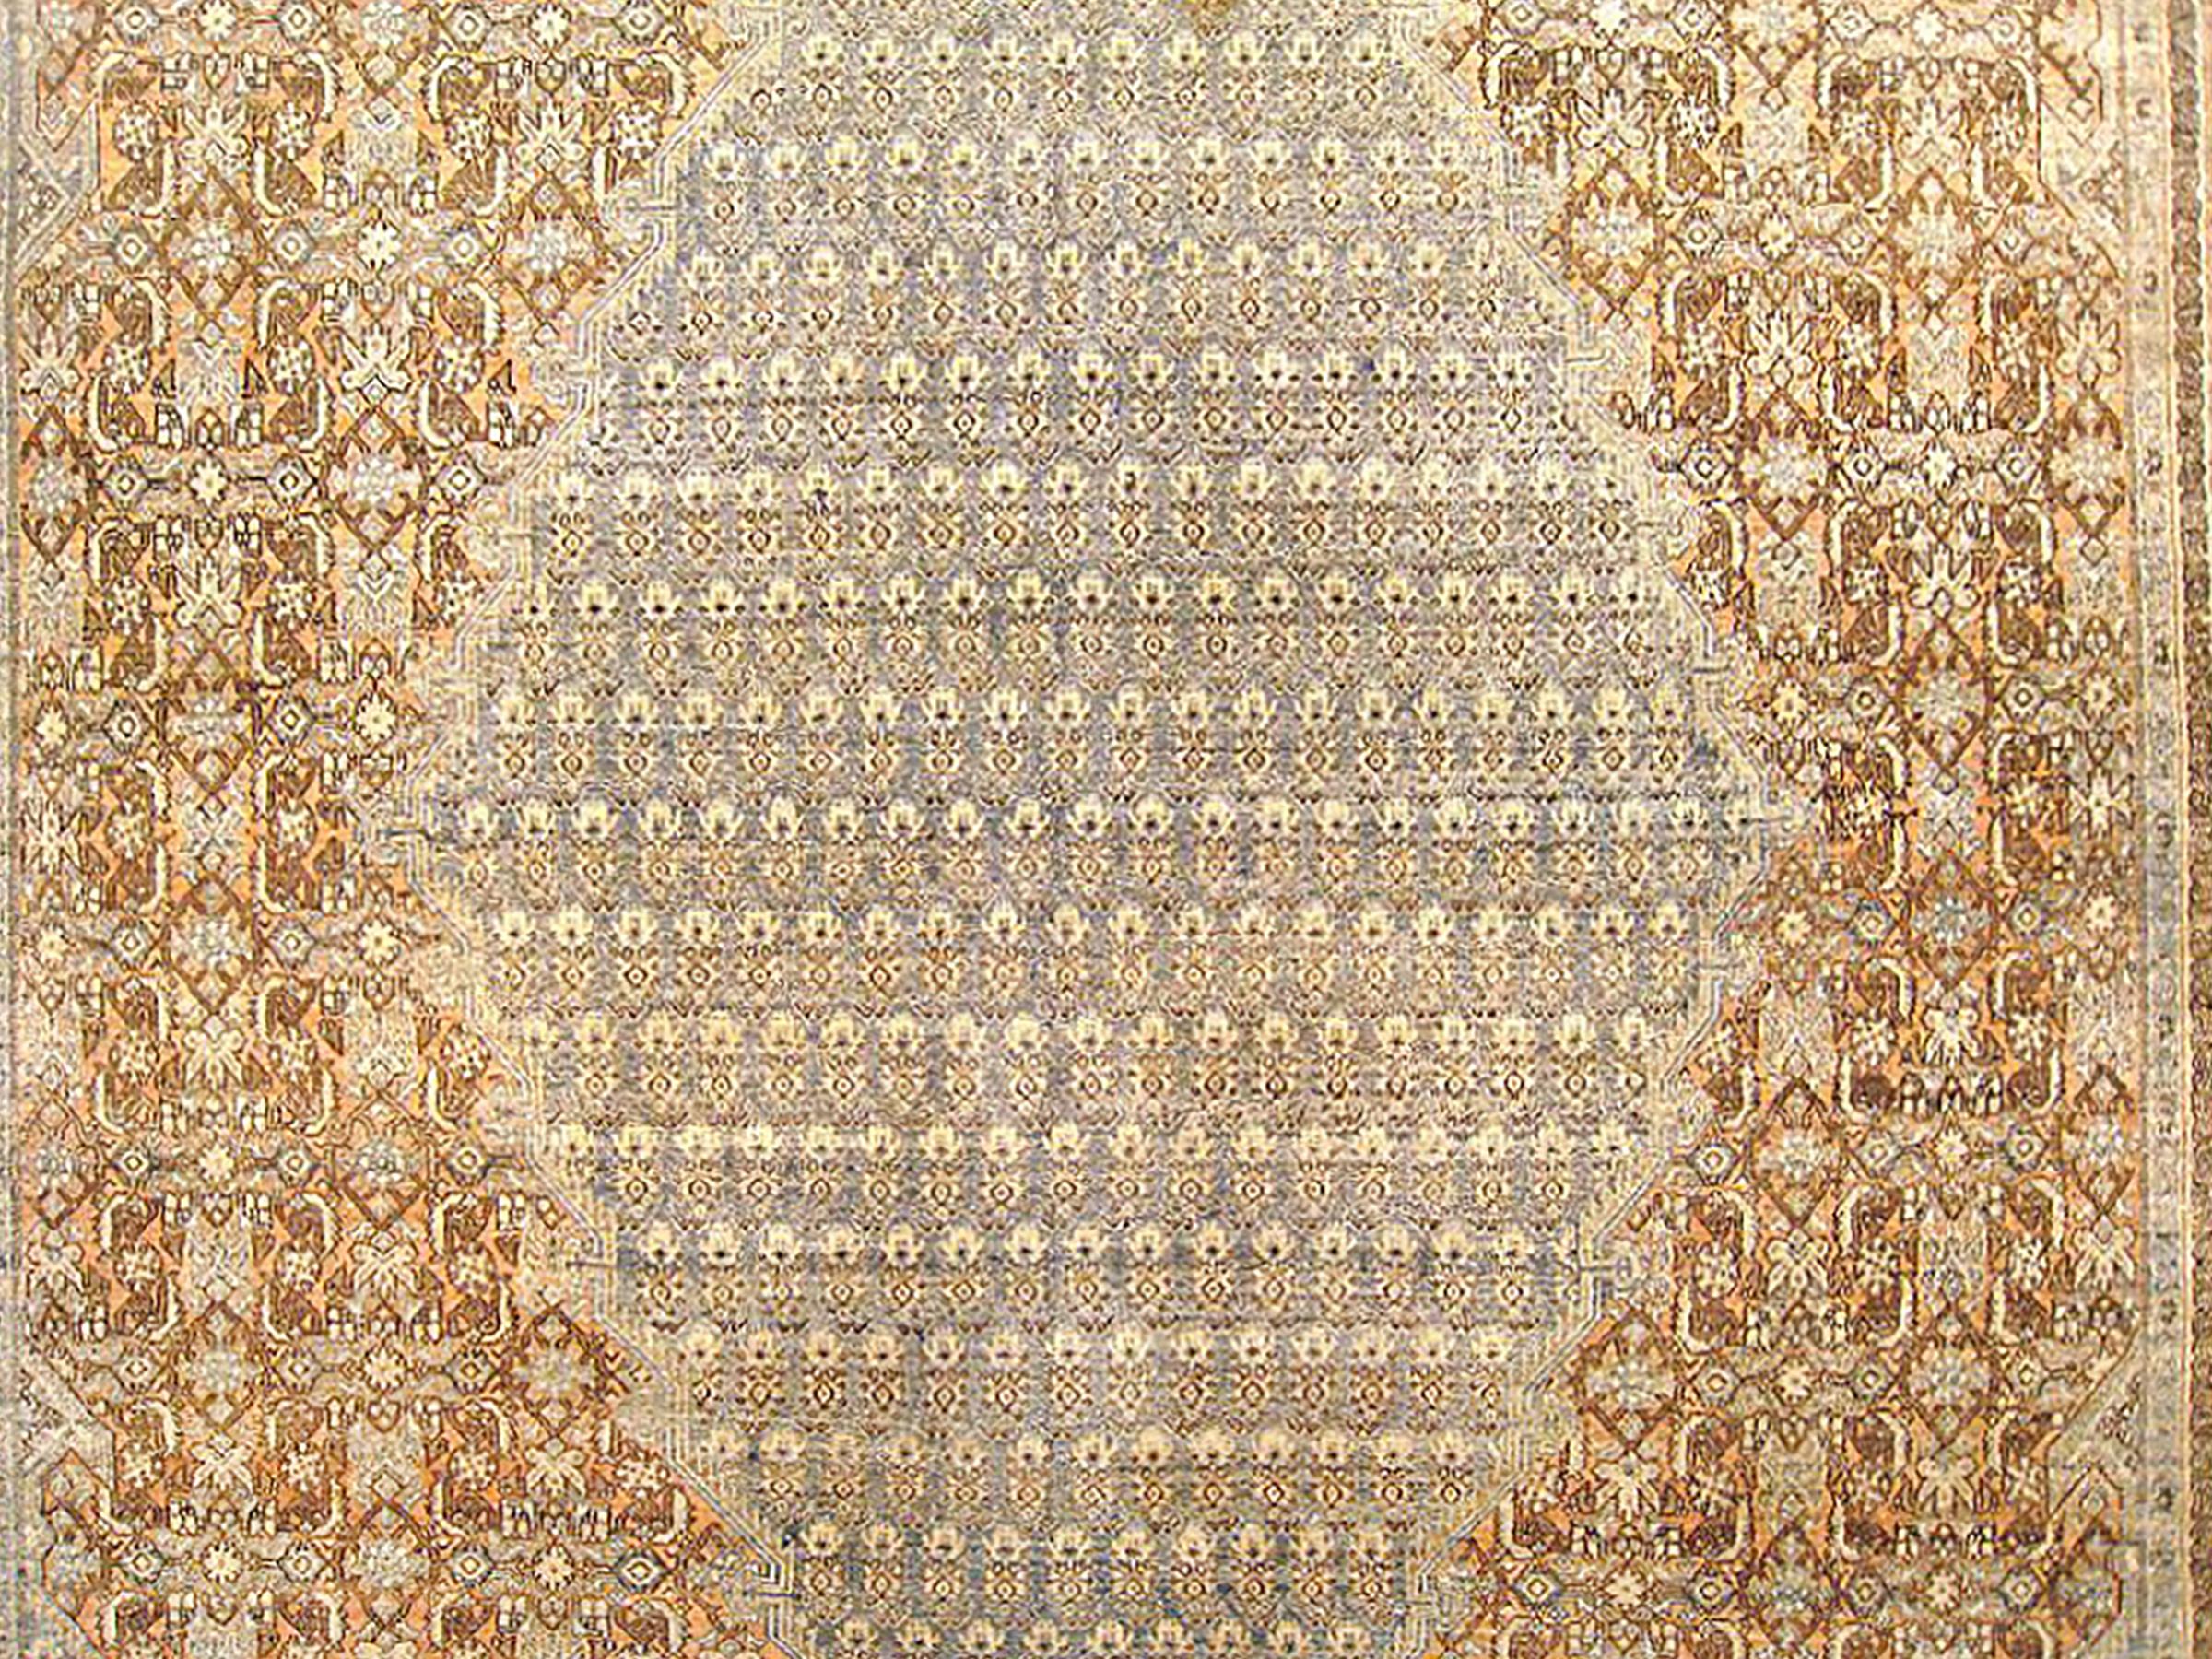 Antique Persian Bibikabad Oriental Rug, in Gallery size, with Central Medallion In Good Condition For Sale In New York, NY